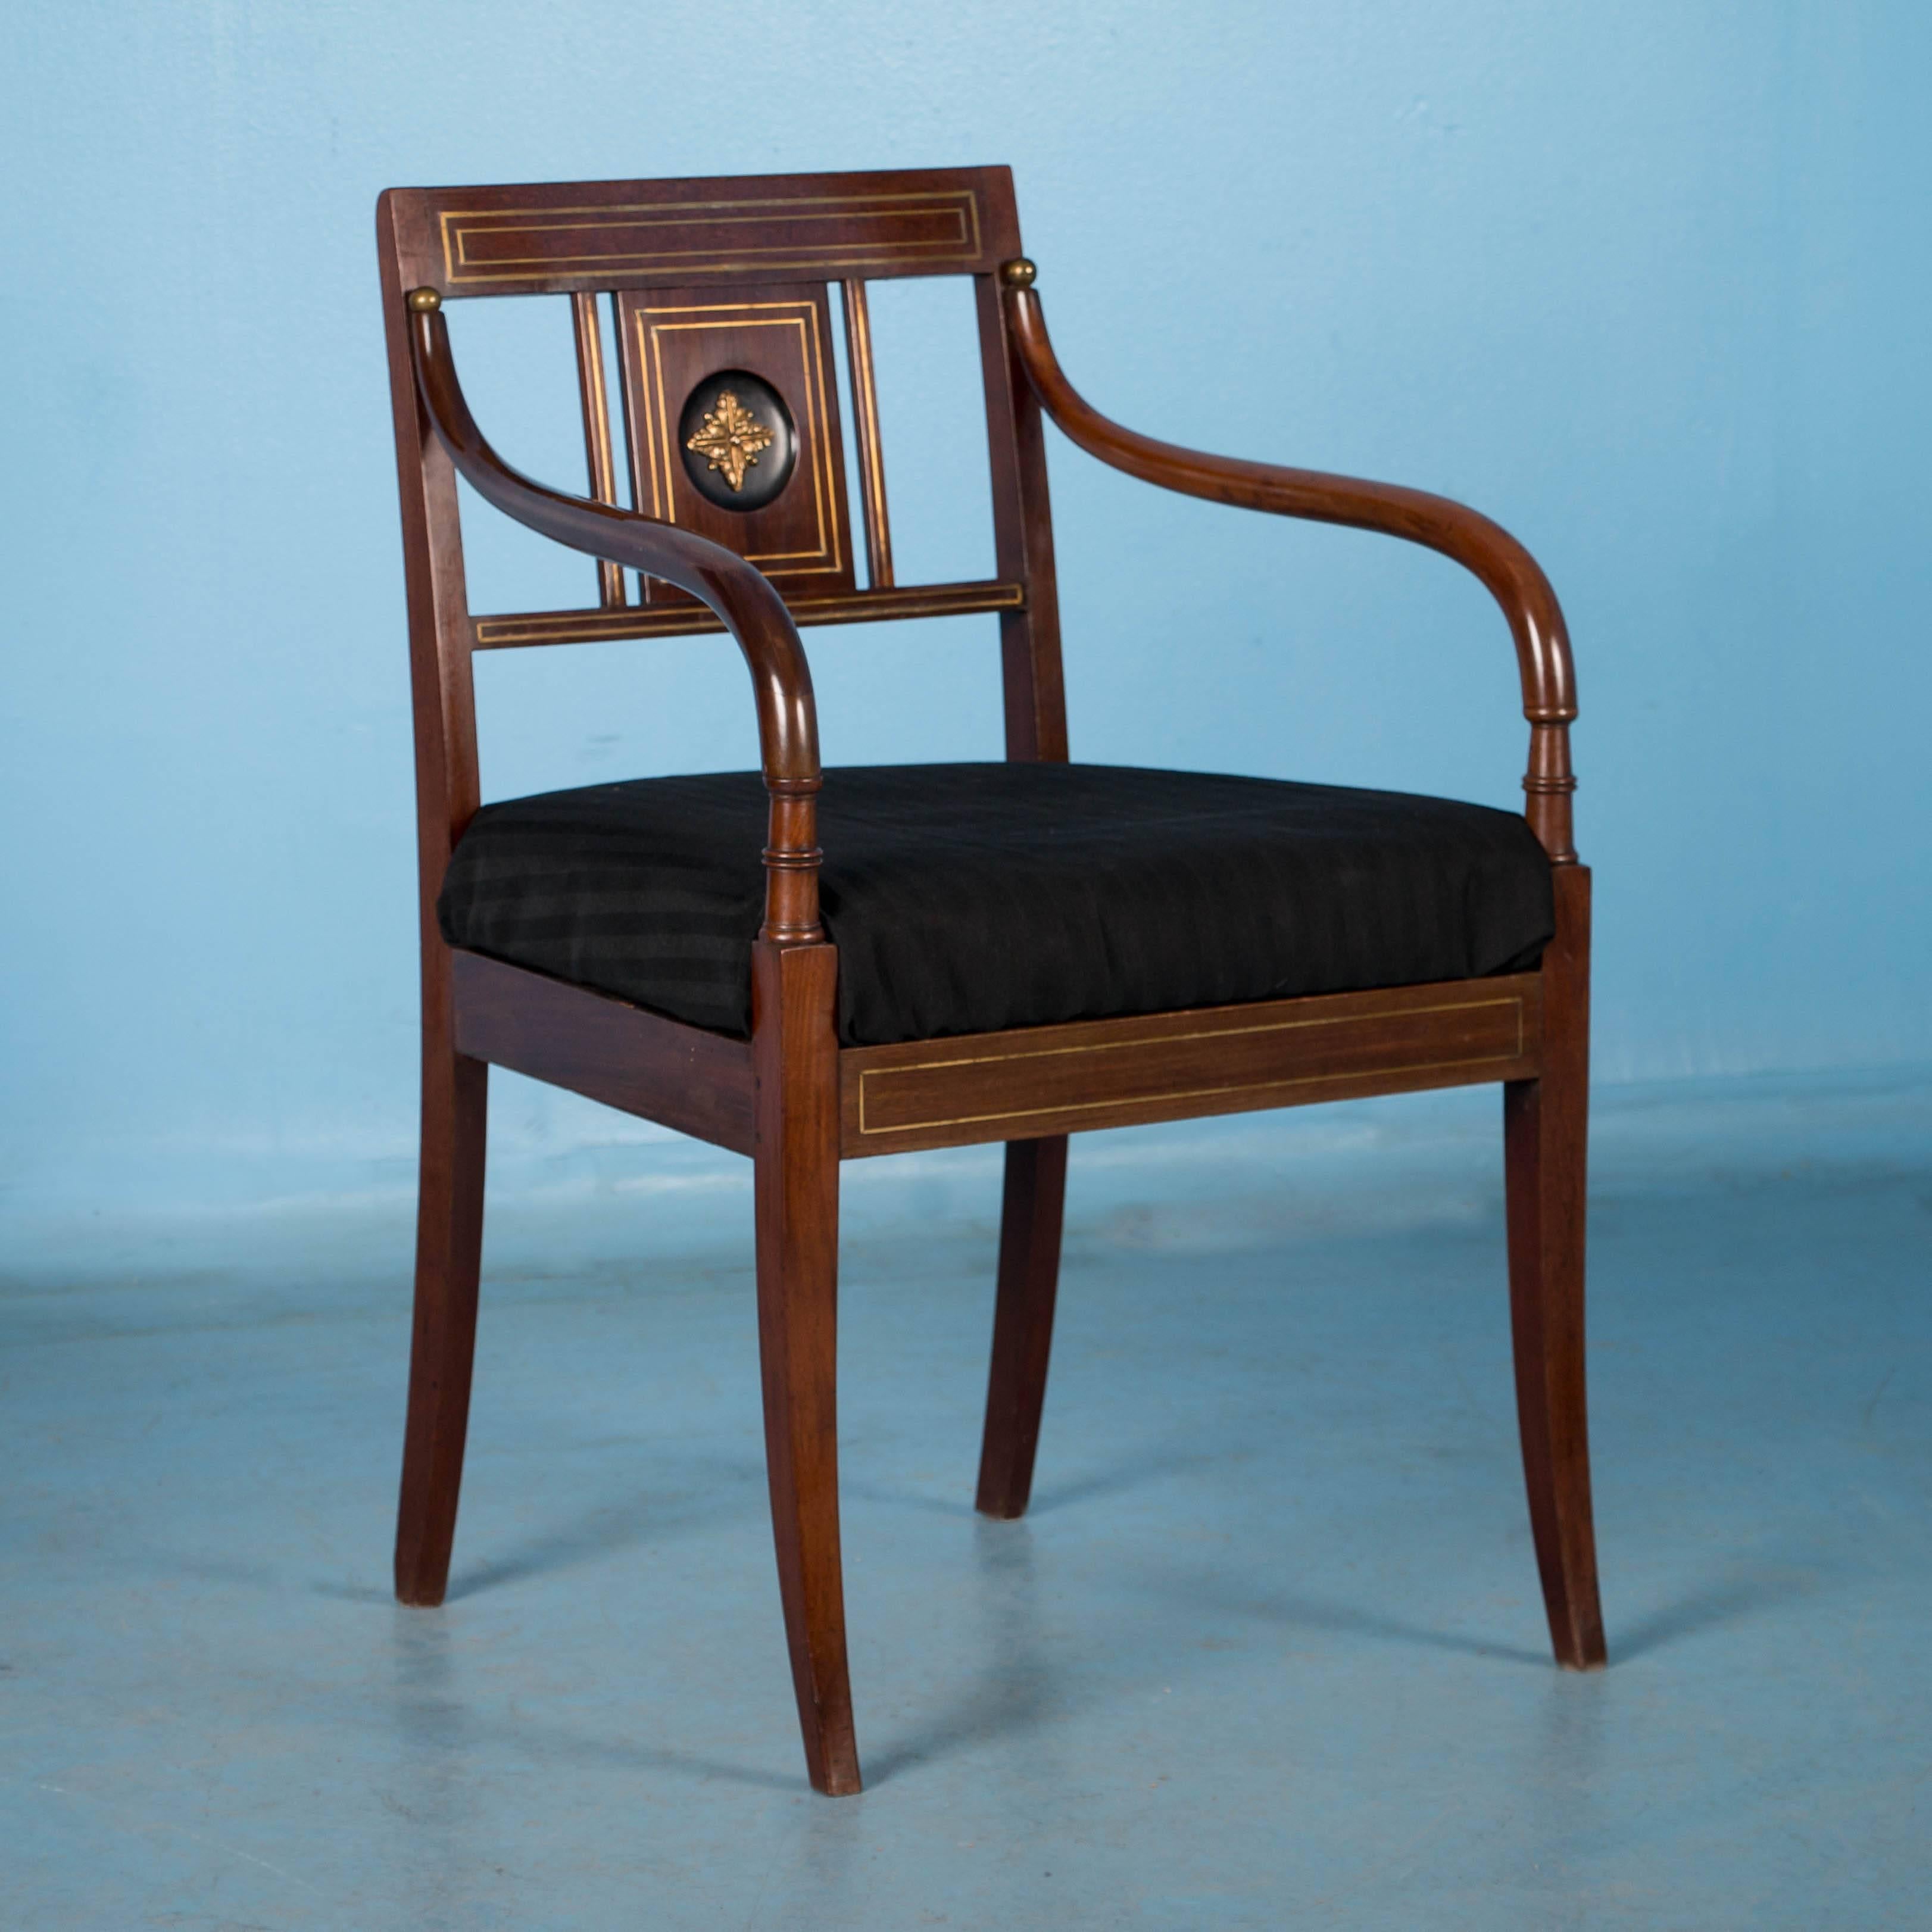 Refined and elegant, this exceptional pair of mahogany Empire period arm chairs are from Stockholm, Sweden. Note in the close up photos the brass inlay and medallion in the center panel of the back adding to the stately appeal of the pair. Both